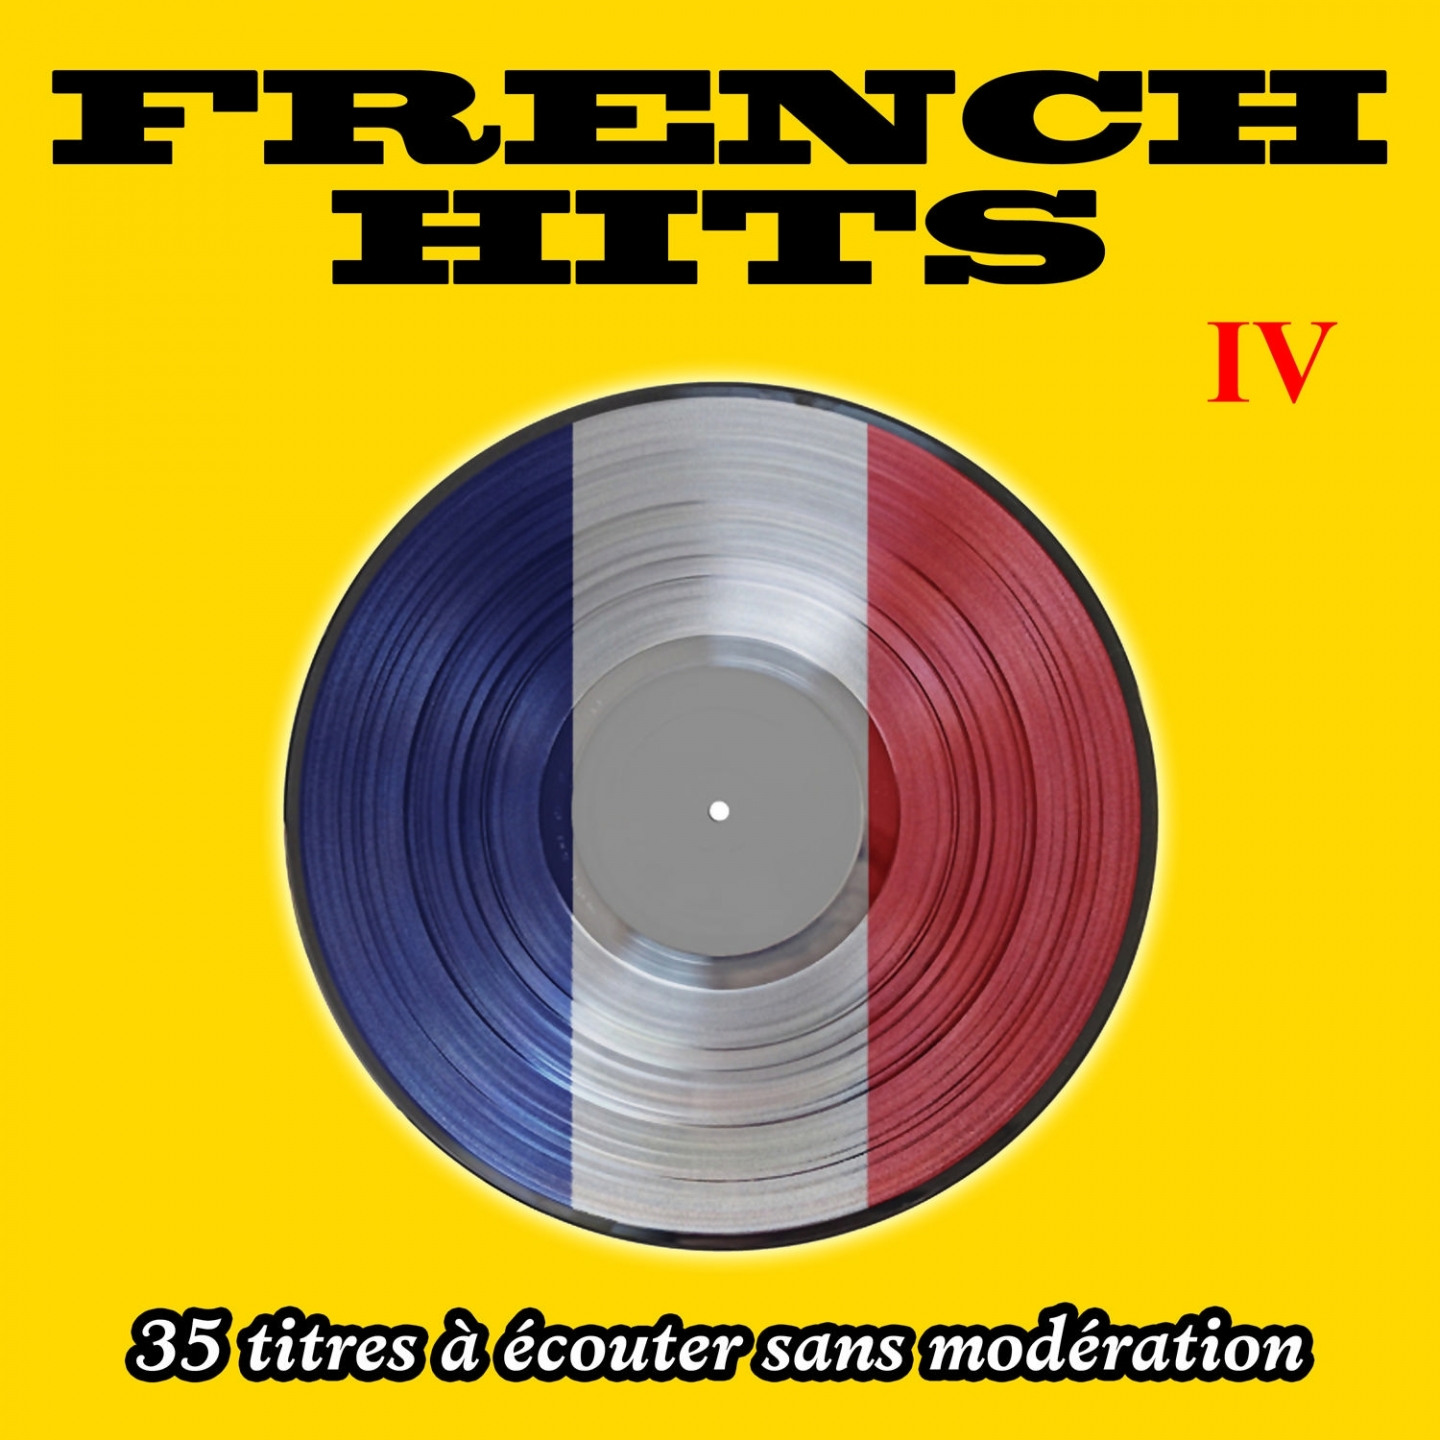 French Hits, Vol. 4